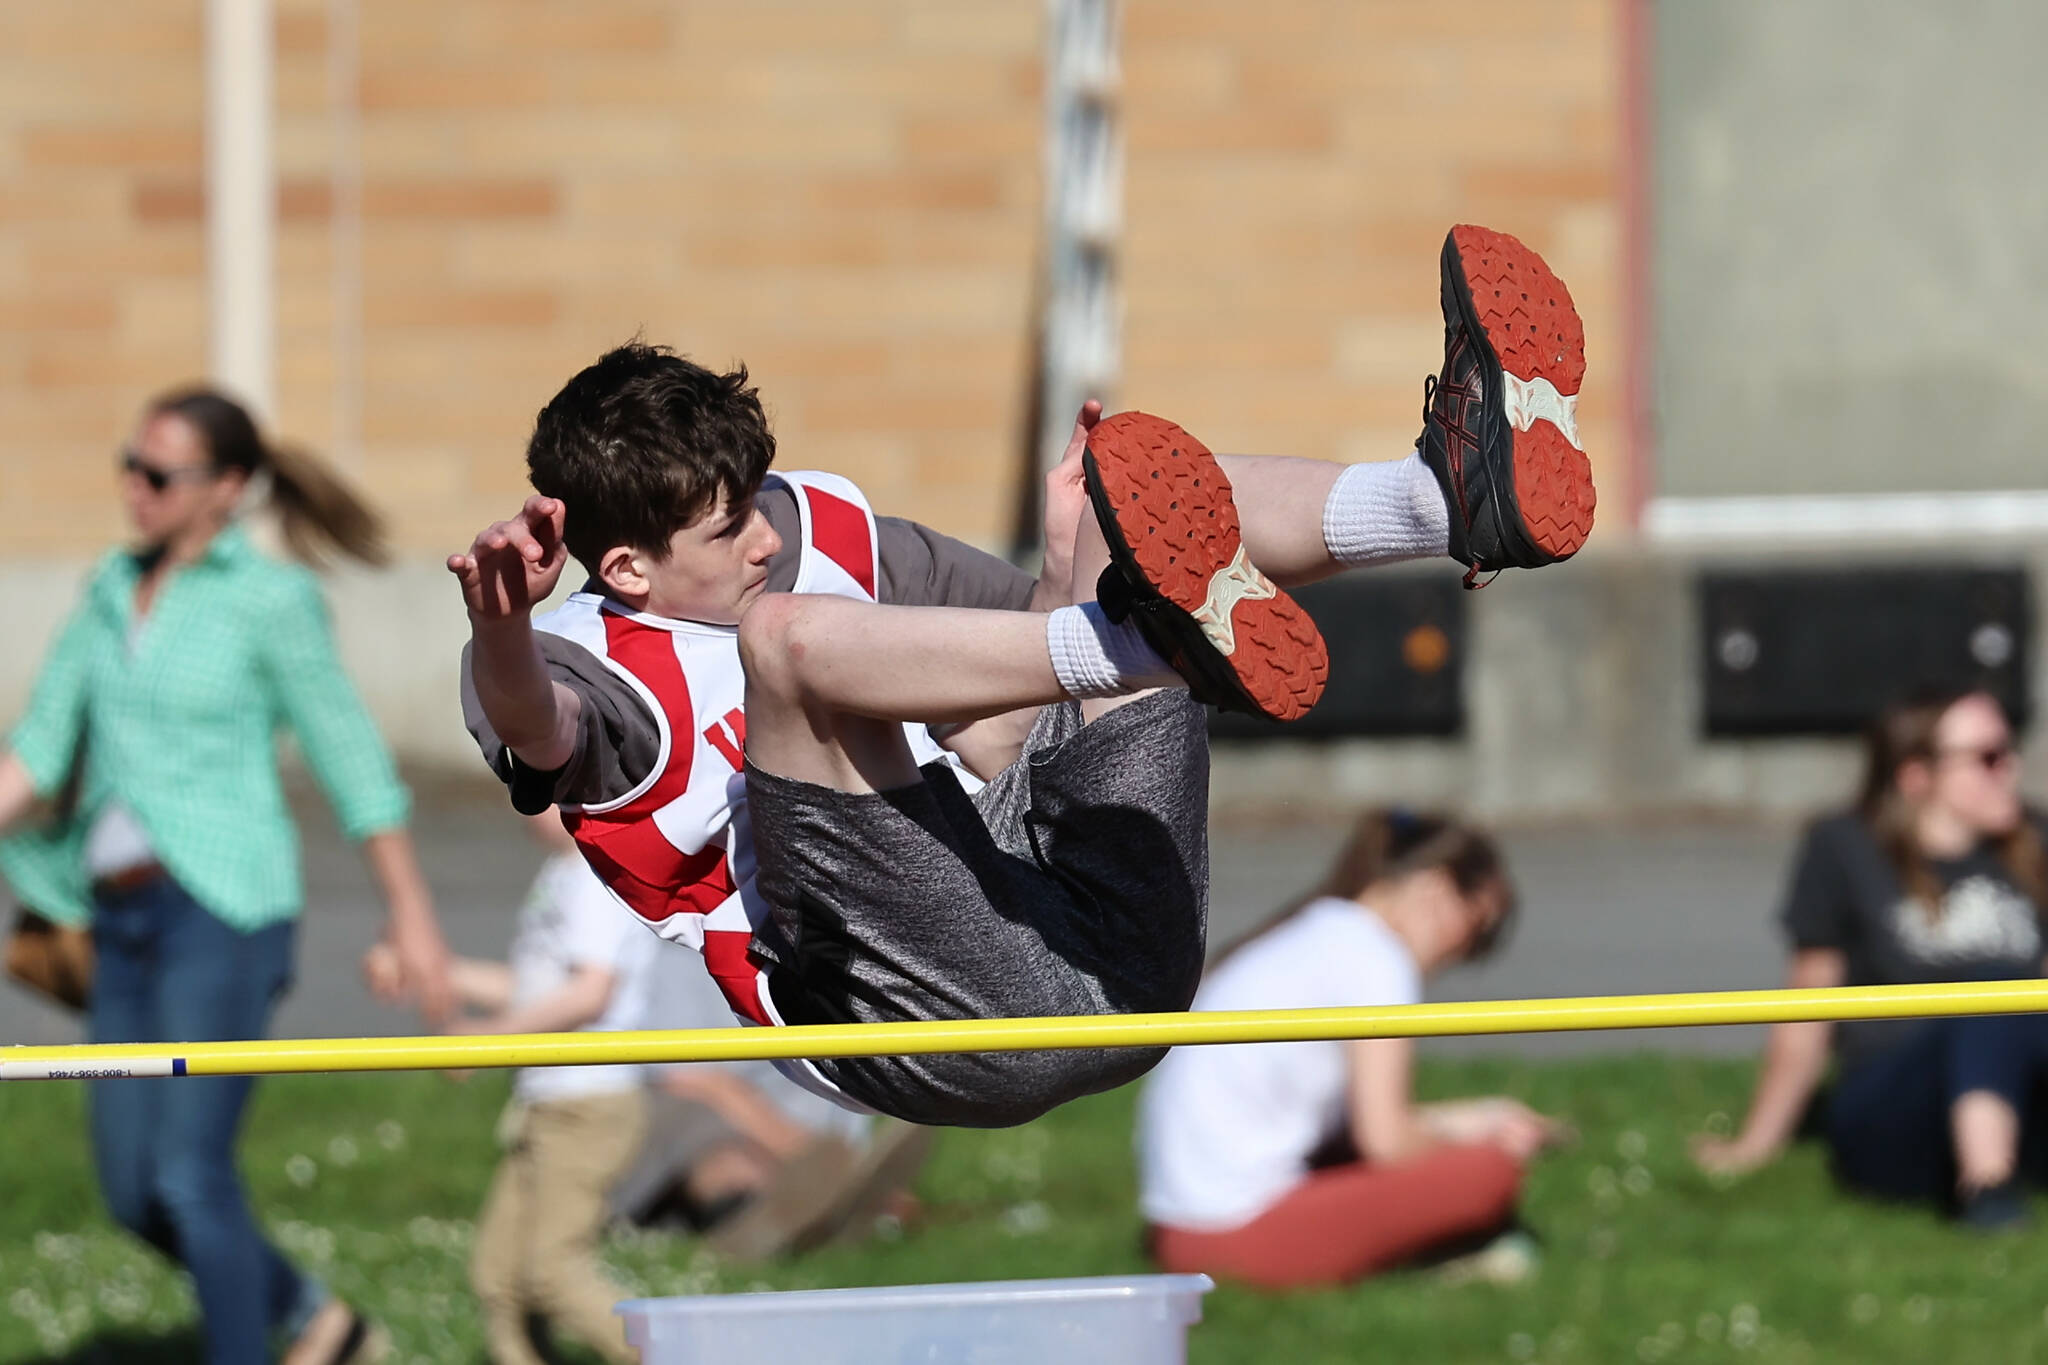 Seventh grader Johnathan Jacobsen competes in the high jump. (Photo by John Fisken)